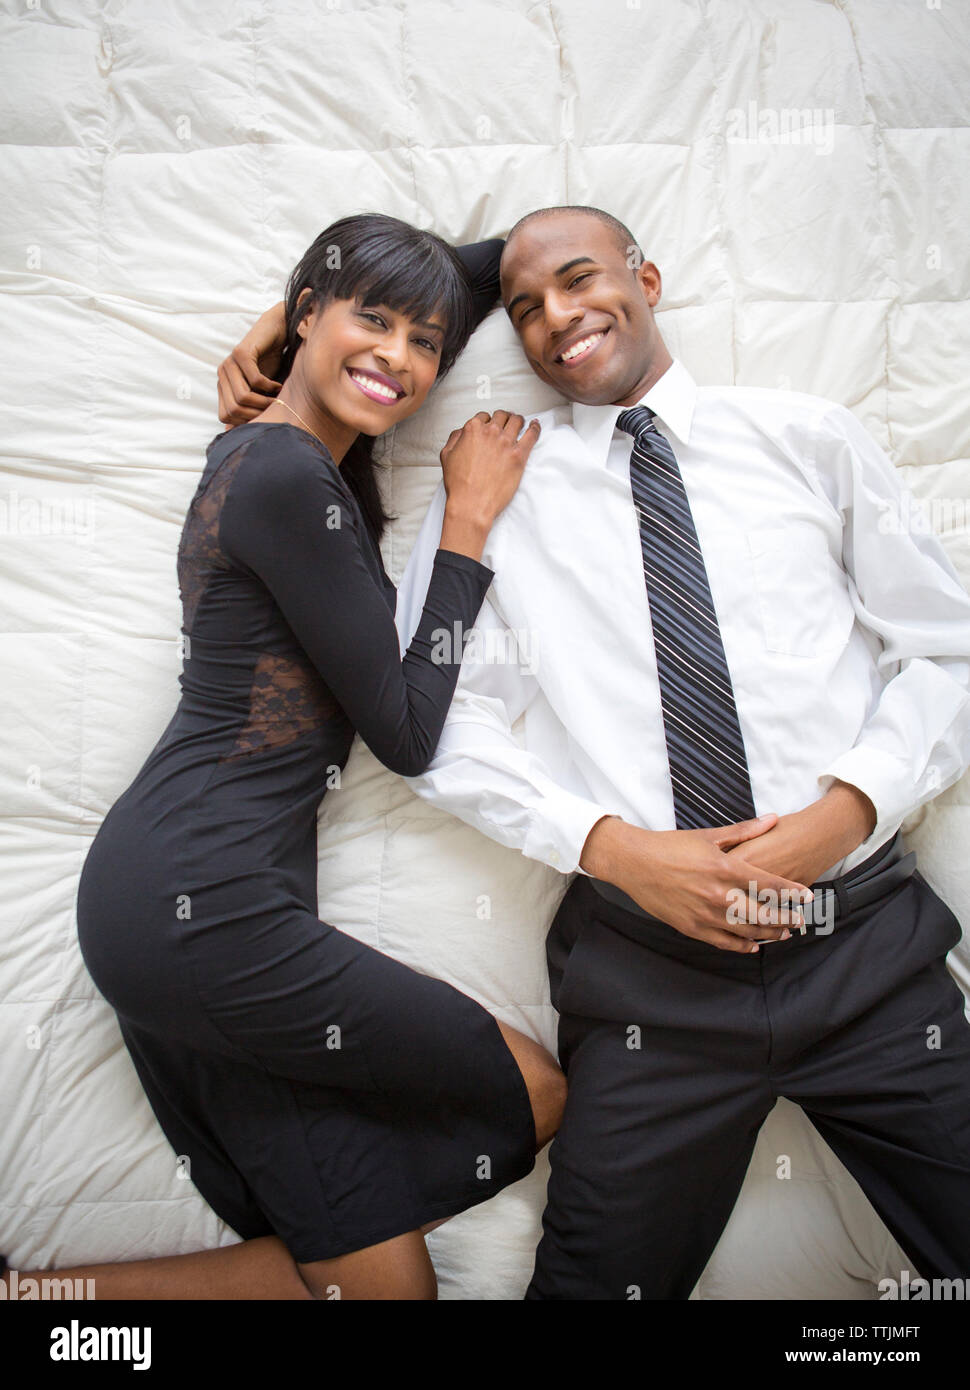 Portrait of smiling couple lying on bed Banque D'Images